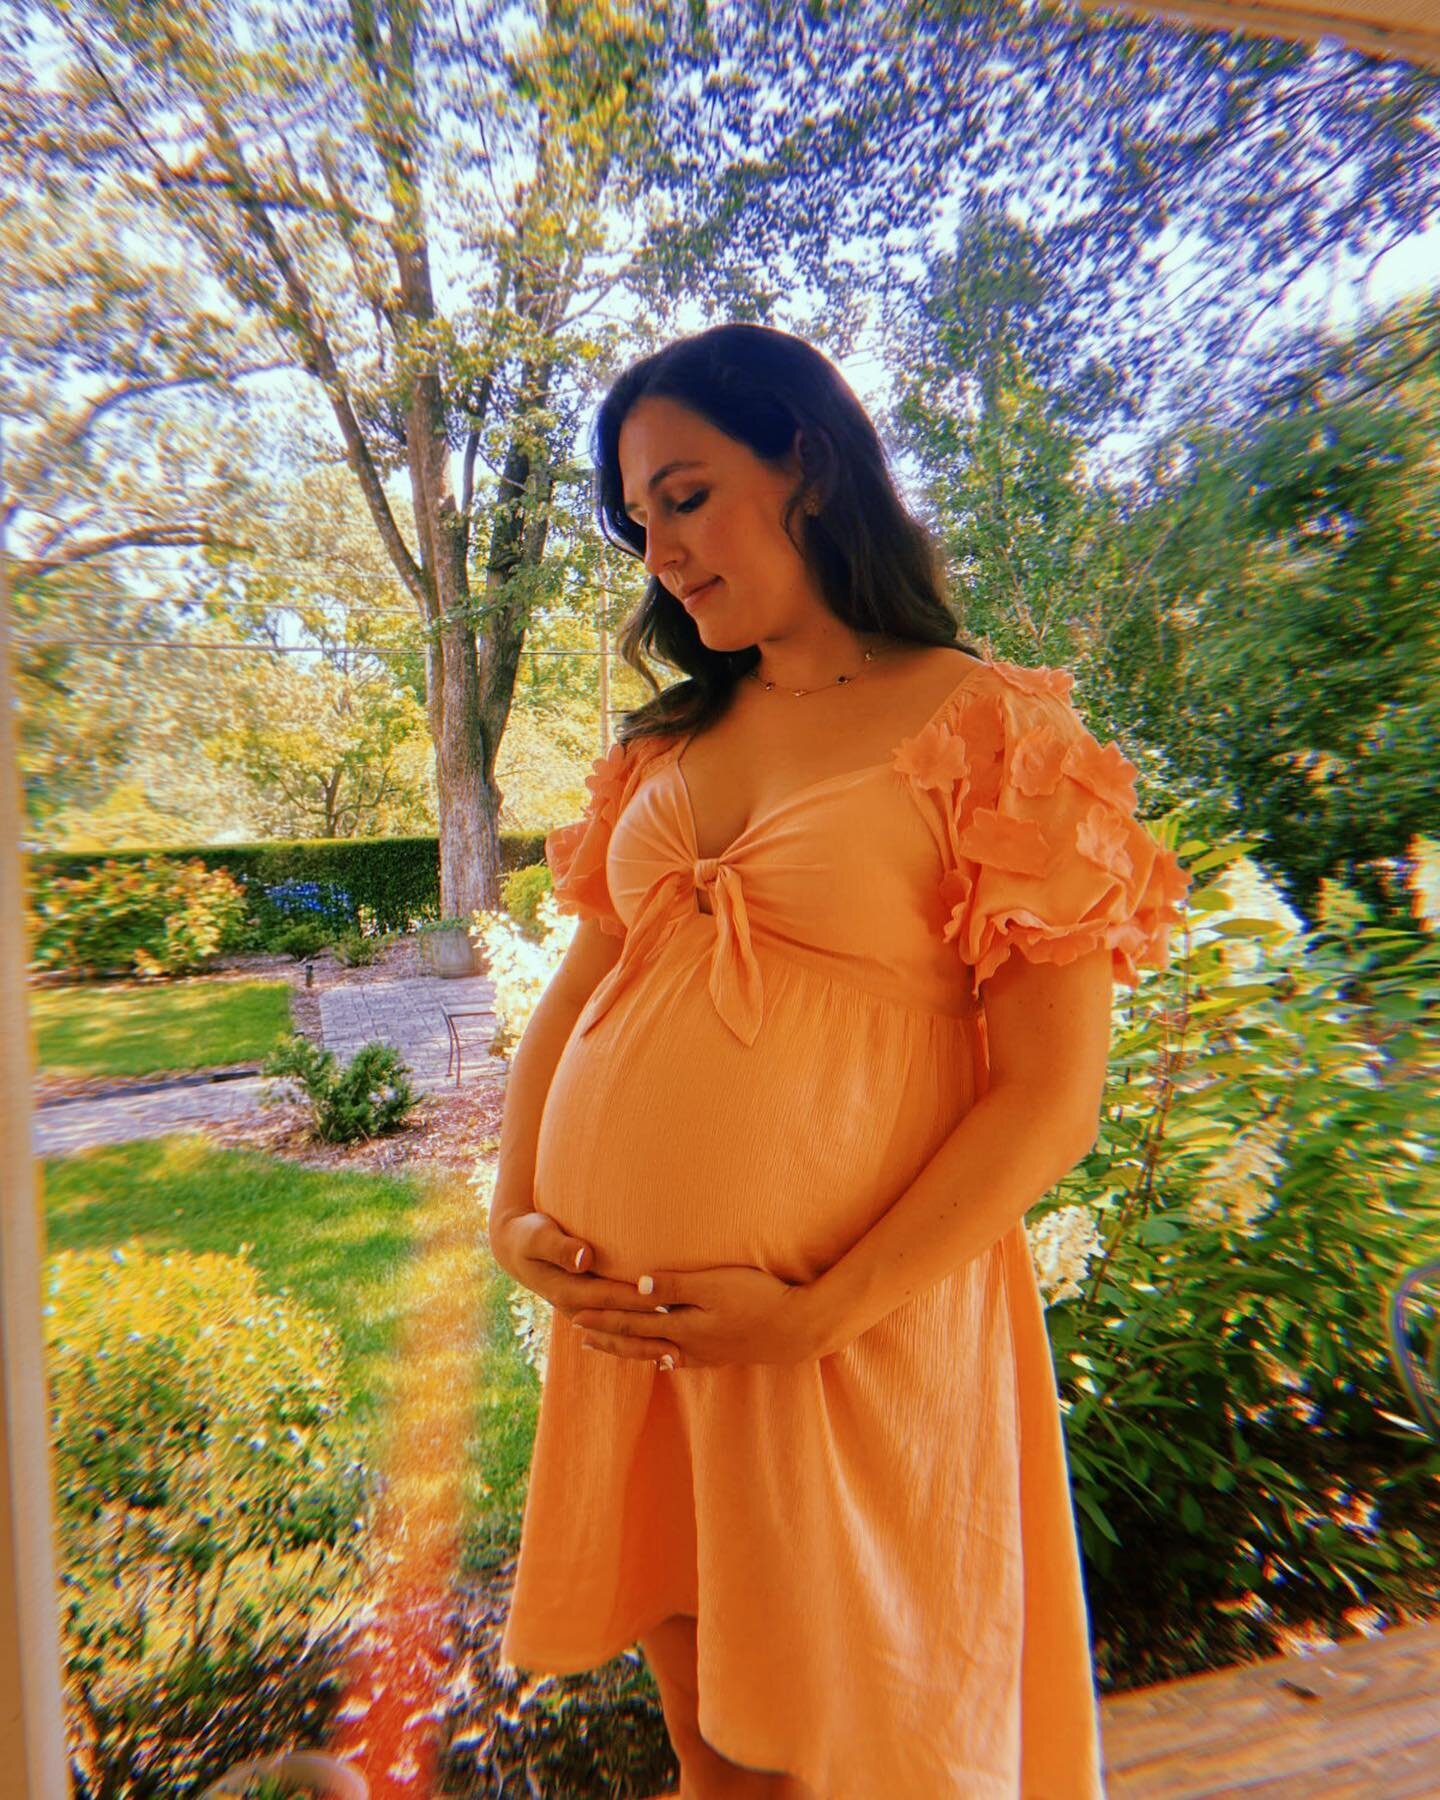 Redesign | A moment for Kristina&rsquo;s baby shower fit 🍑
Swipe to see the before&mdash;&gt;
She wanted to take a basic maternity dress and make it her own, so she thrifted this blouse with the idea of separating the flowers to add somewhere on the